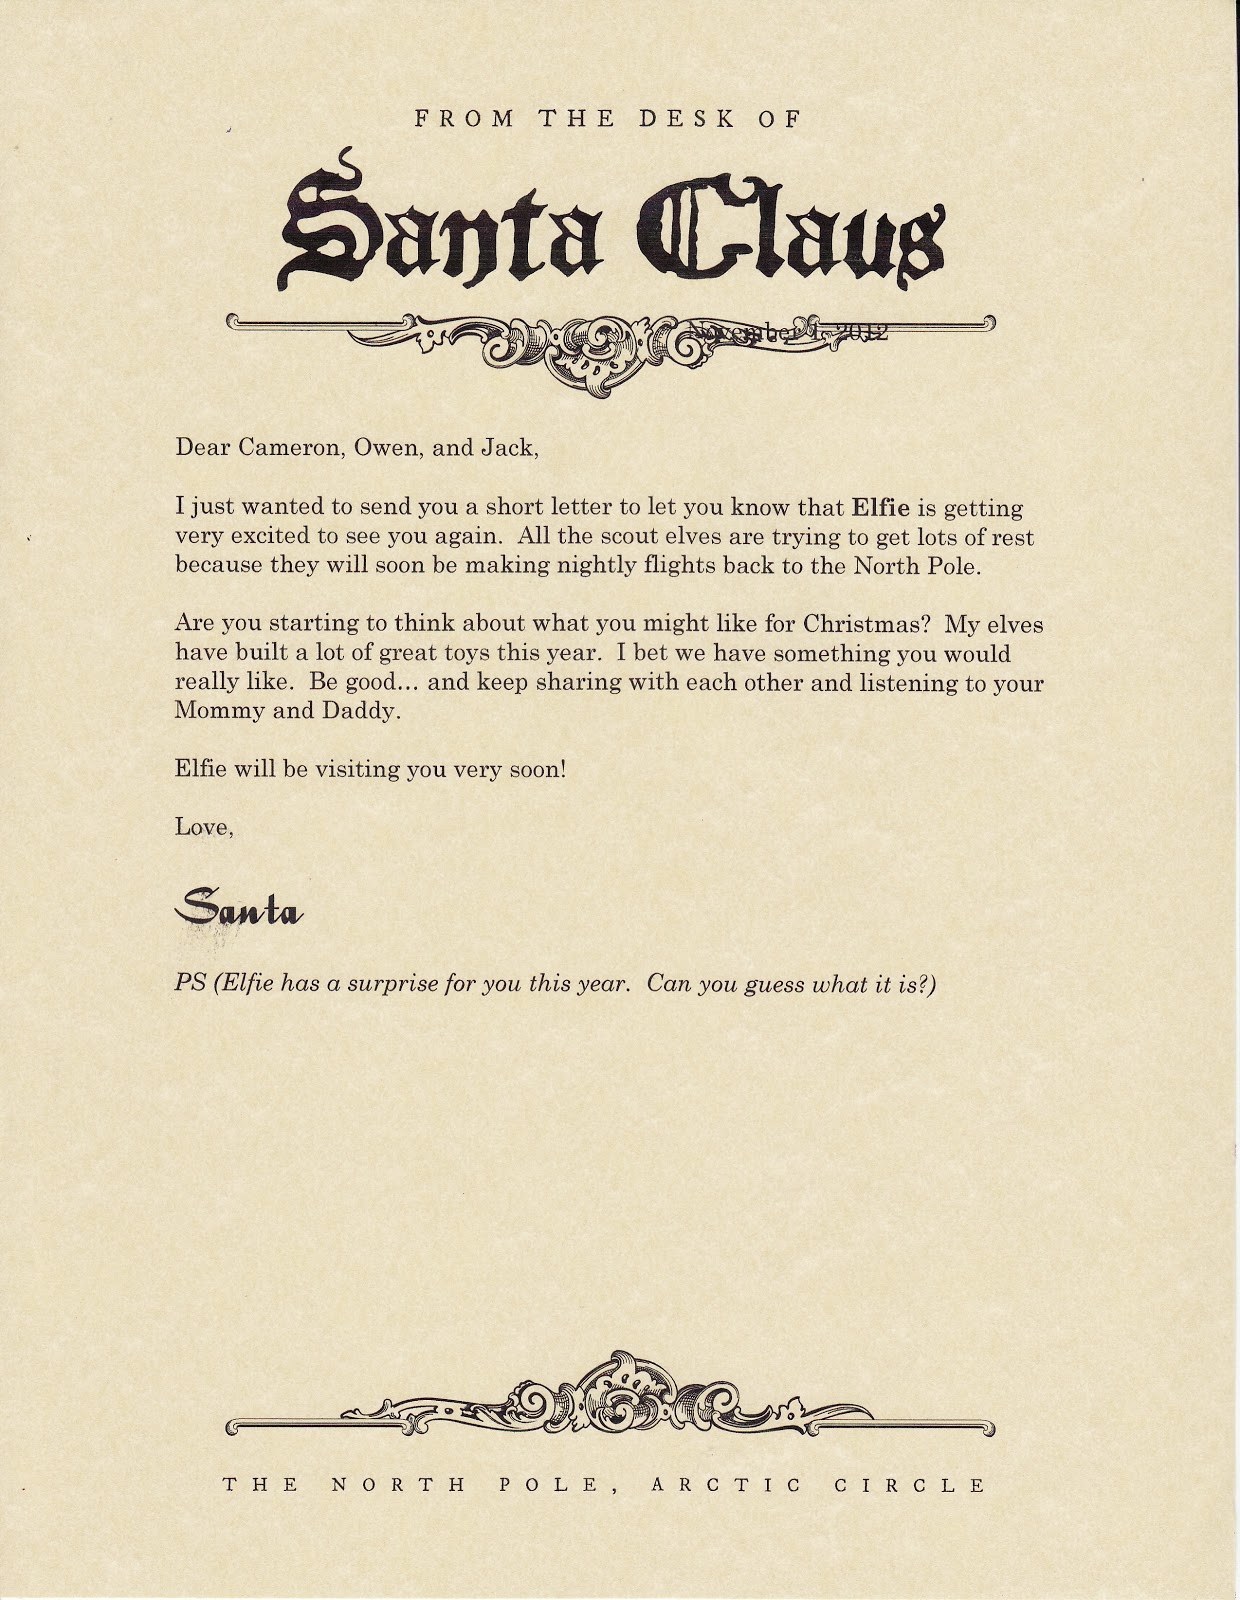 letter-from-santa-free-printable